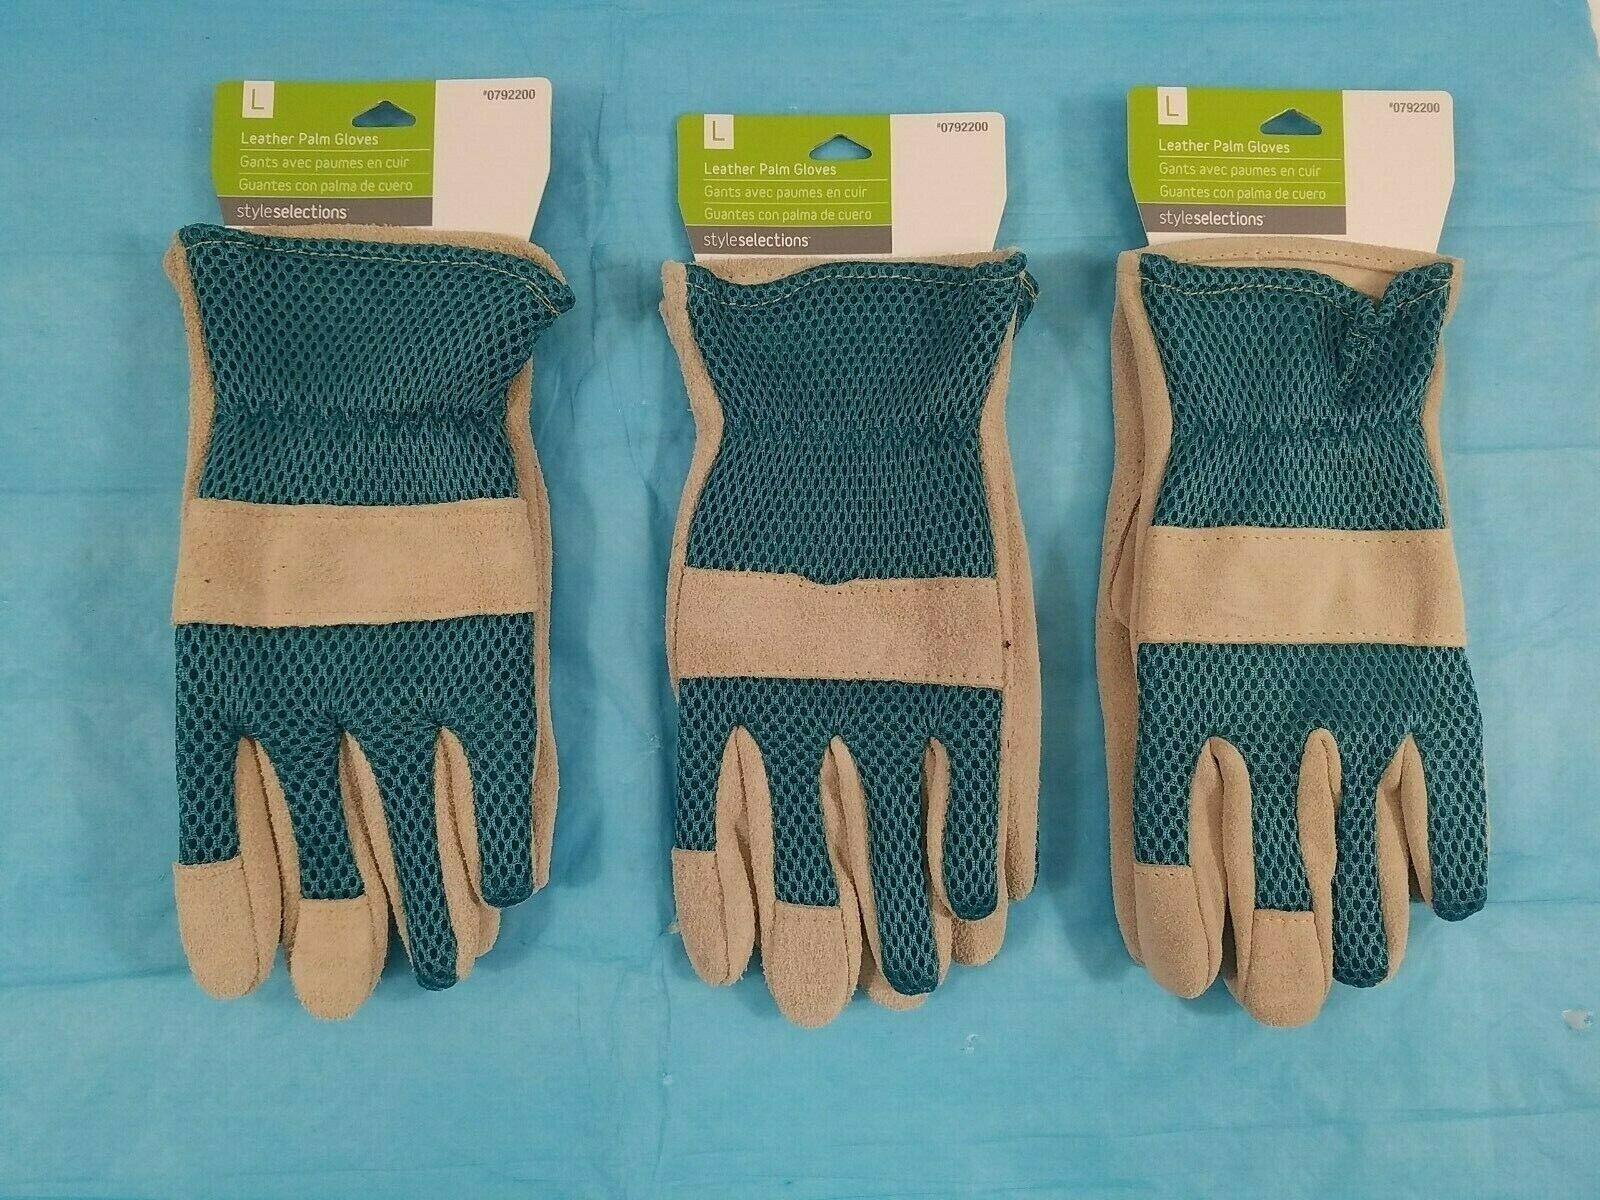 West Chester 0792200 Womens Large Polyester Garden Gloves-Lot of 3 Style Selections 0792200